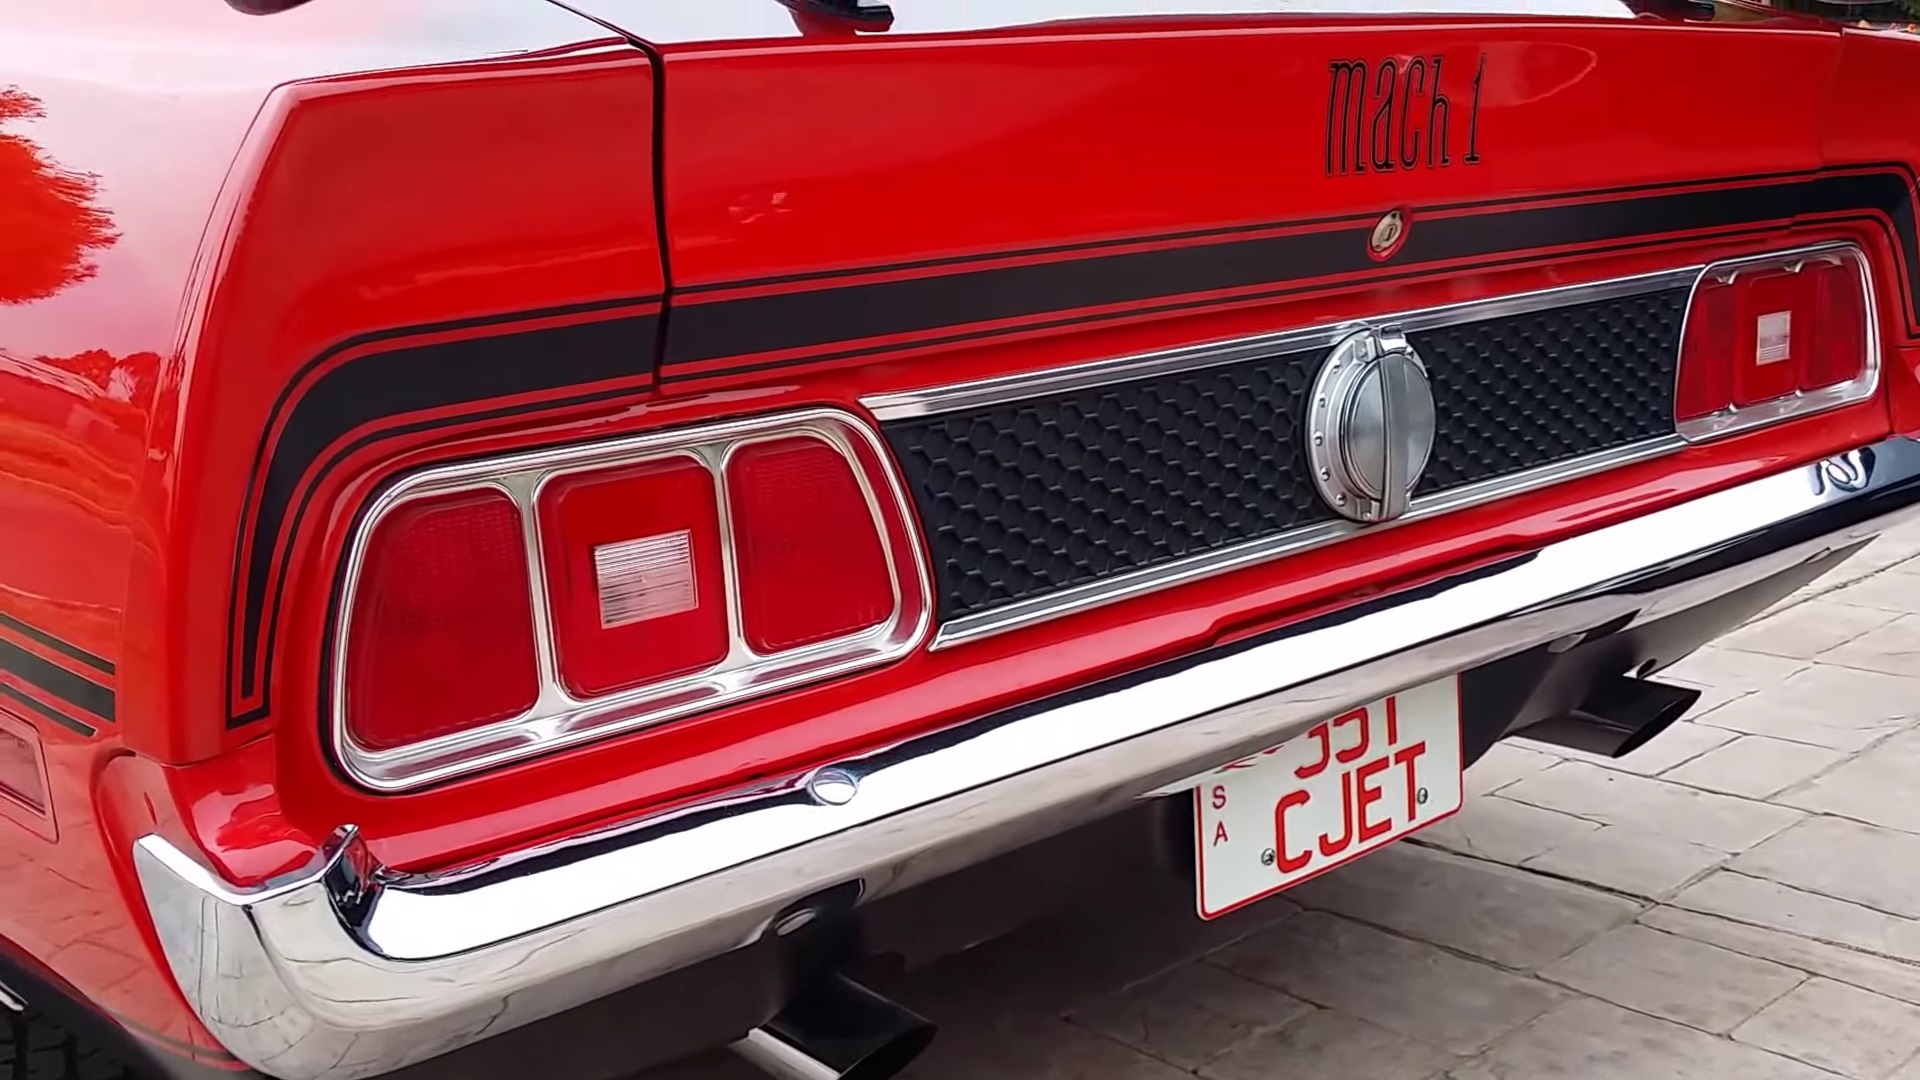 Video: 1973 Ford Mustang Mach 1 Quick Tour + Engine Sound